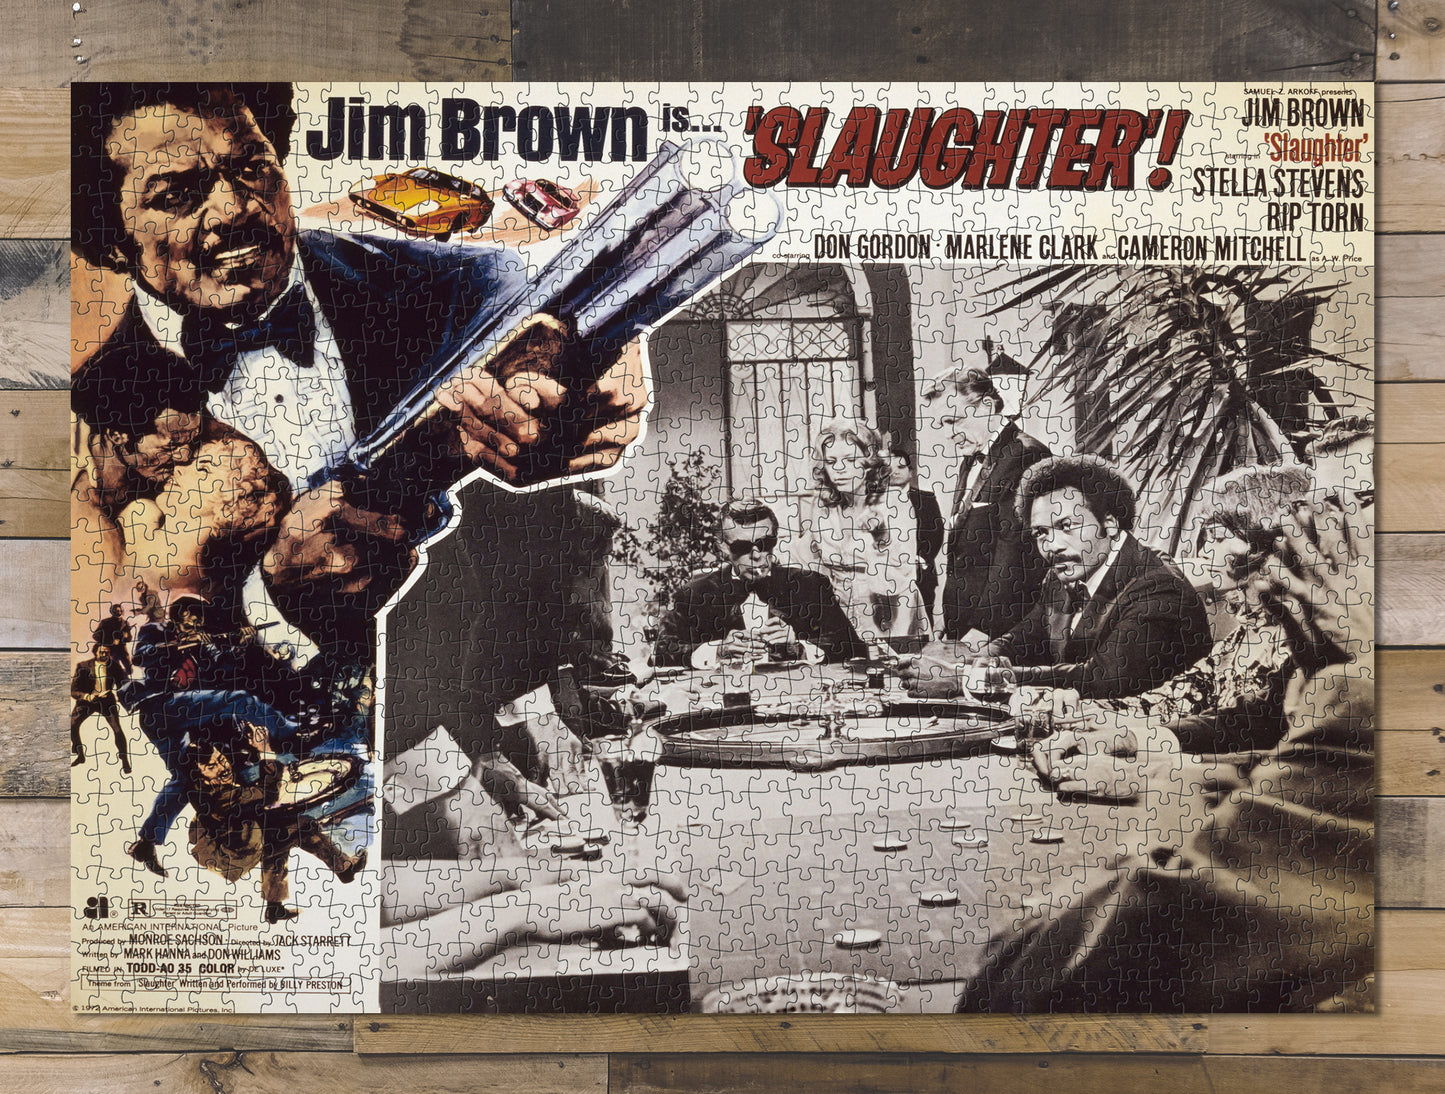 1000 piece puzzle Photo: Slaughter showing star Jim Brown at a roulette table, and wielding a gun